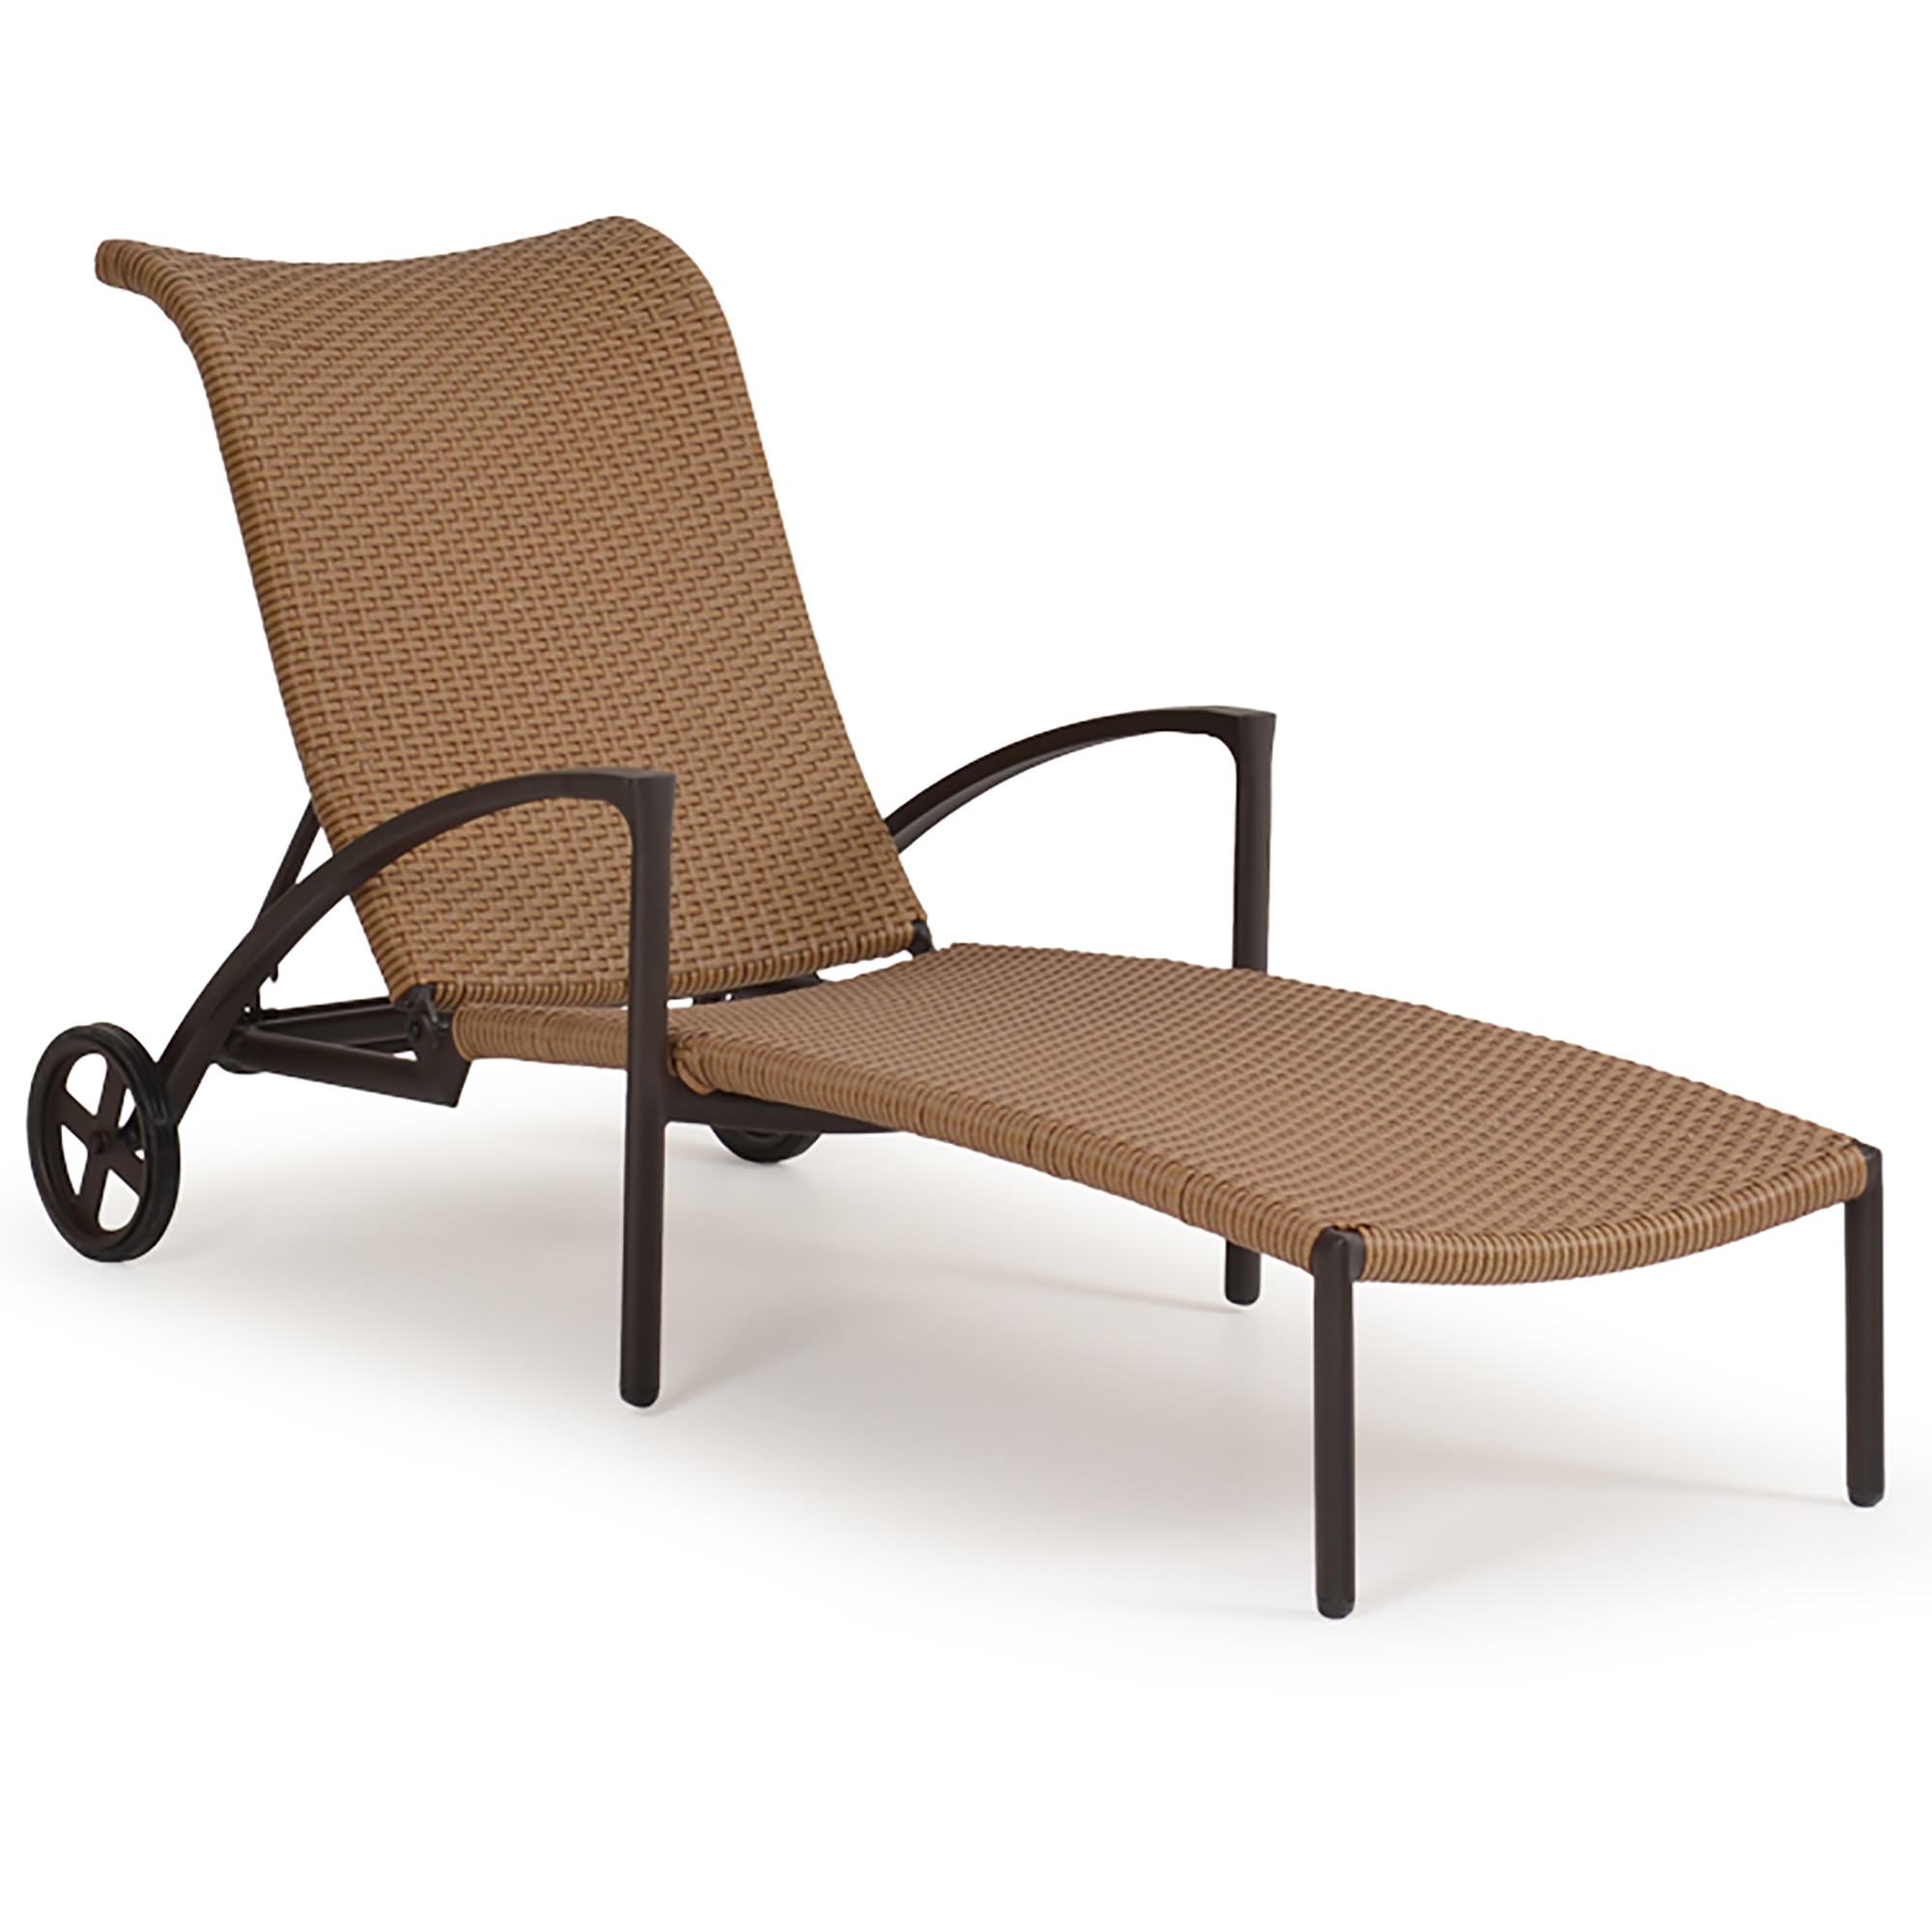 WaterMark Living Resin Wicker Chaise Lounge | DFOHome